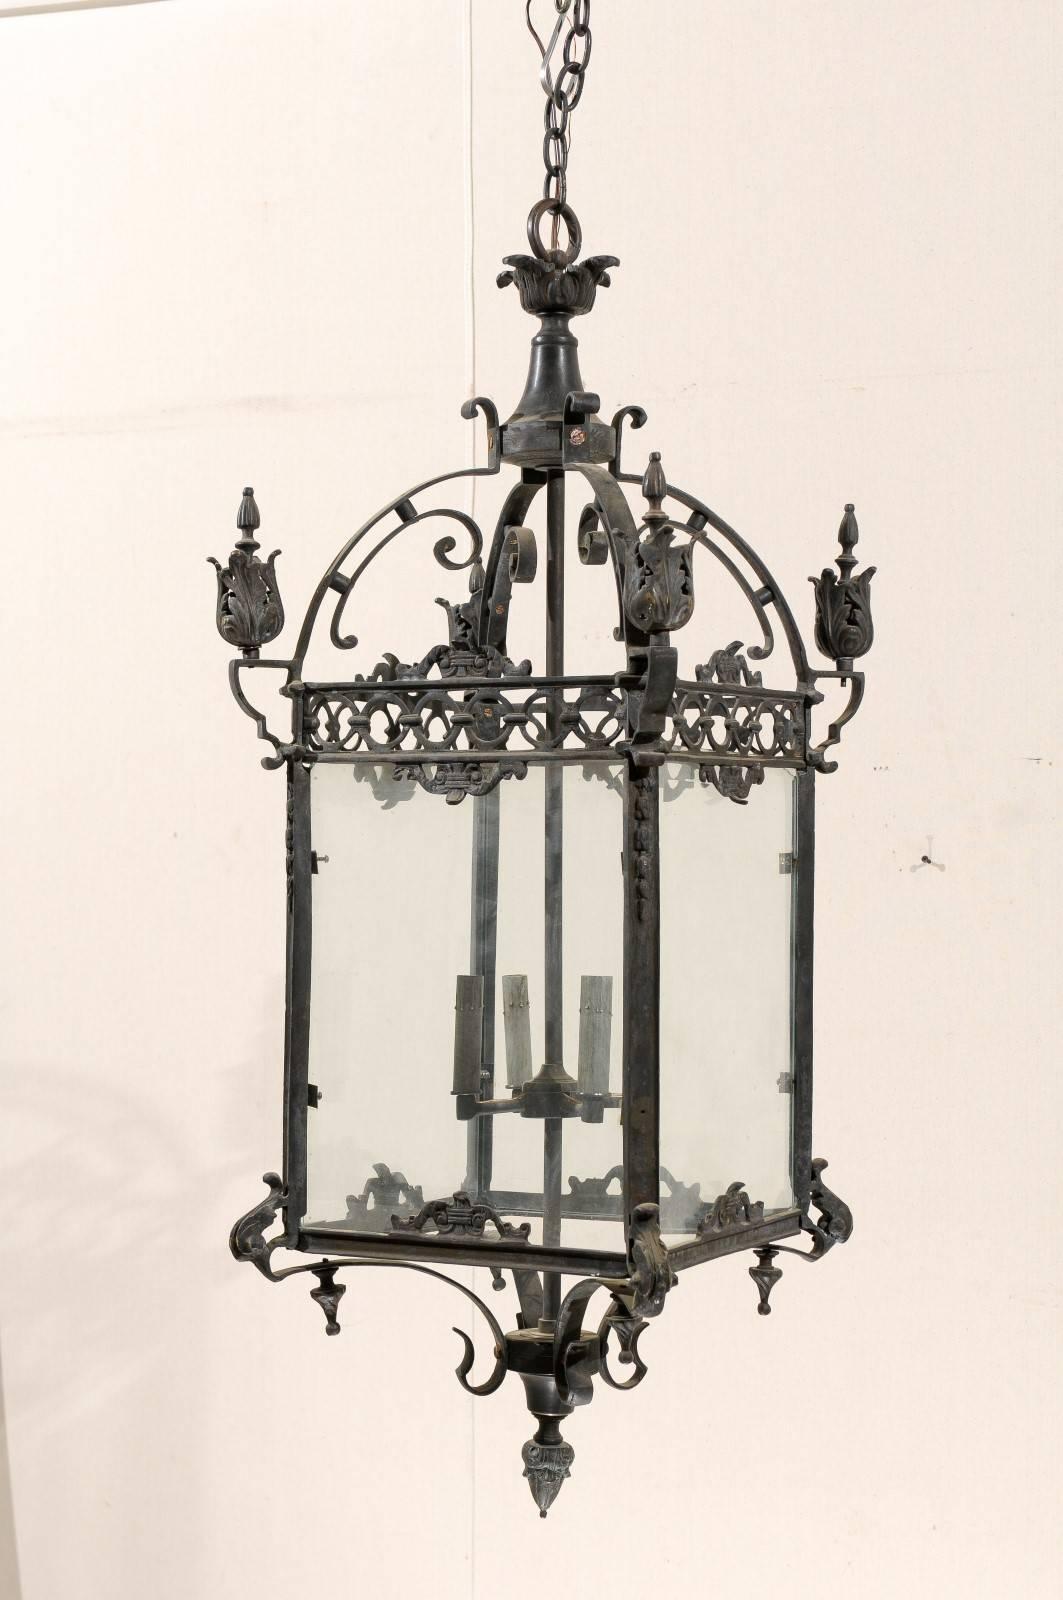 A pair of large sized ornately decorated dark colored iron four-light English lanterns from the mid-20th century. Each lantern is decorated with a sprouting leaf motif at the top. Each one also features C-scroll motifs, acanthus leaf ornamentation